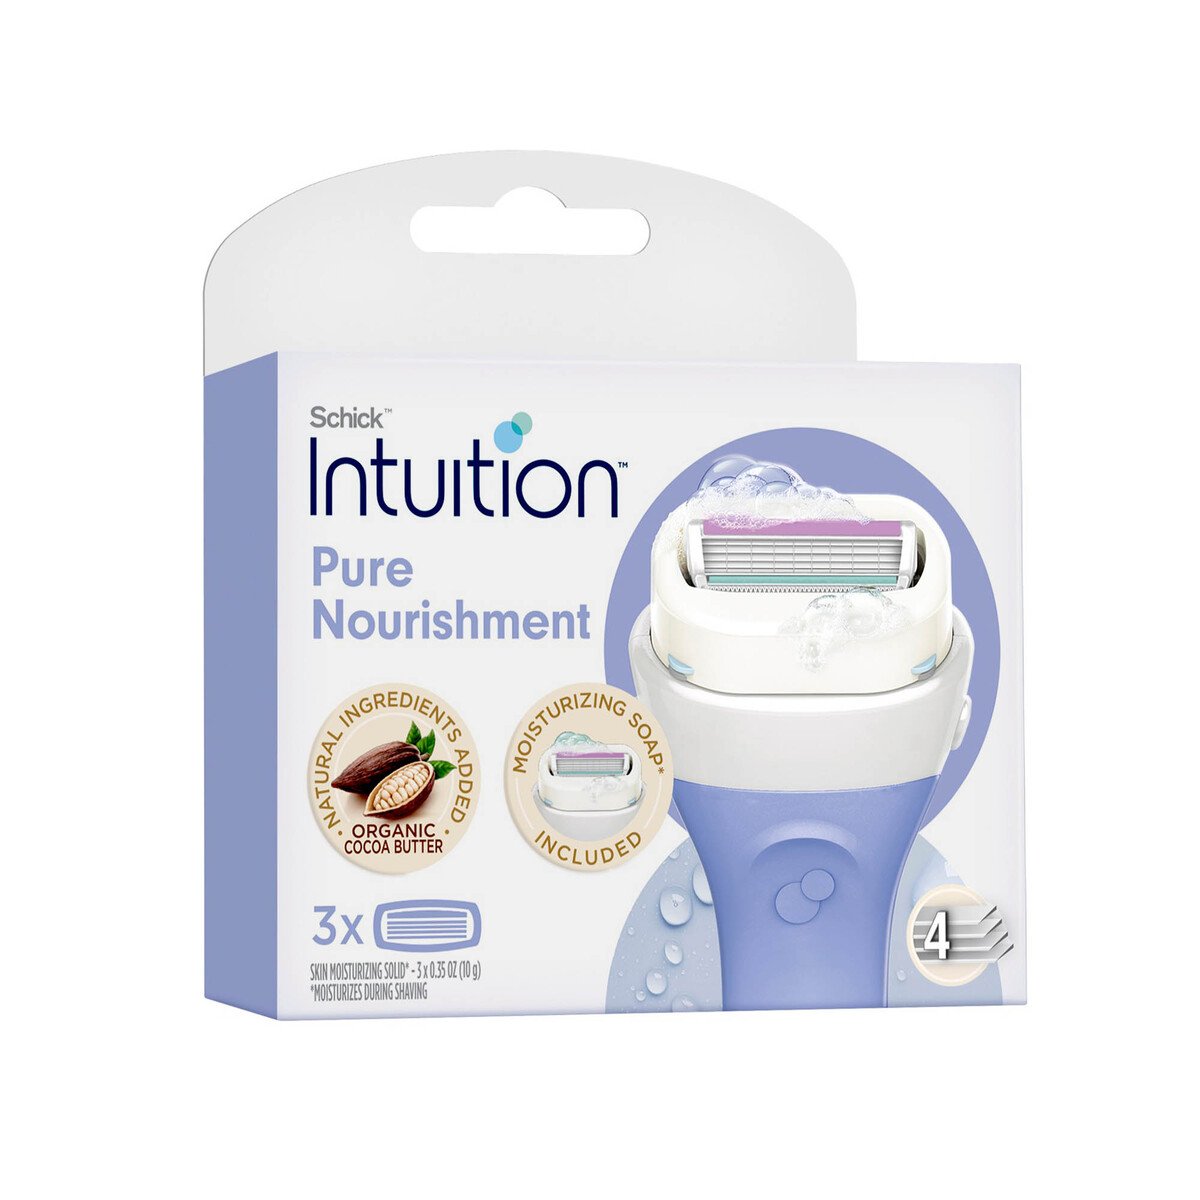 Buy Schick Intuition Pure Nourishment Refill 3 pcs Online at Best Price | System Blades | Lulu UAE in UAE